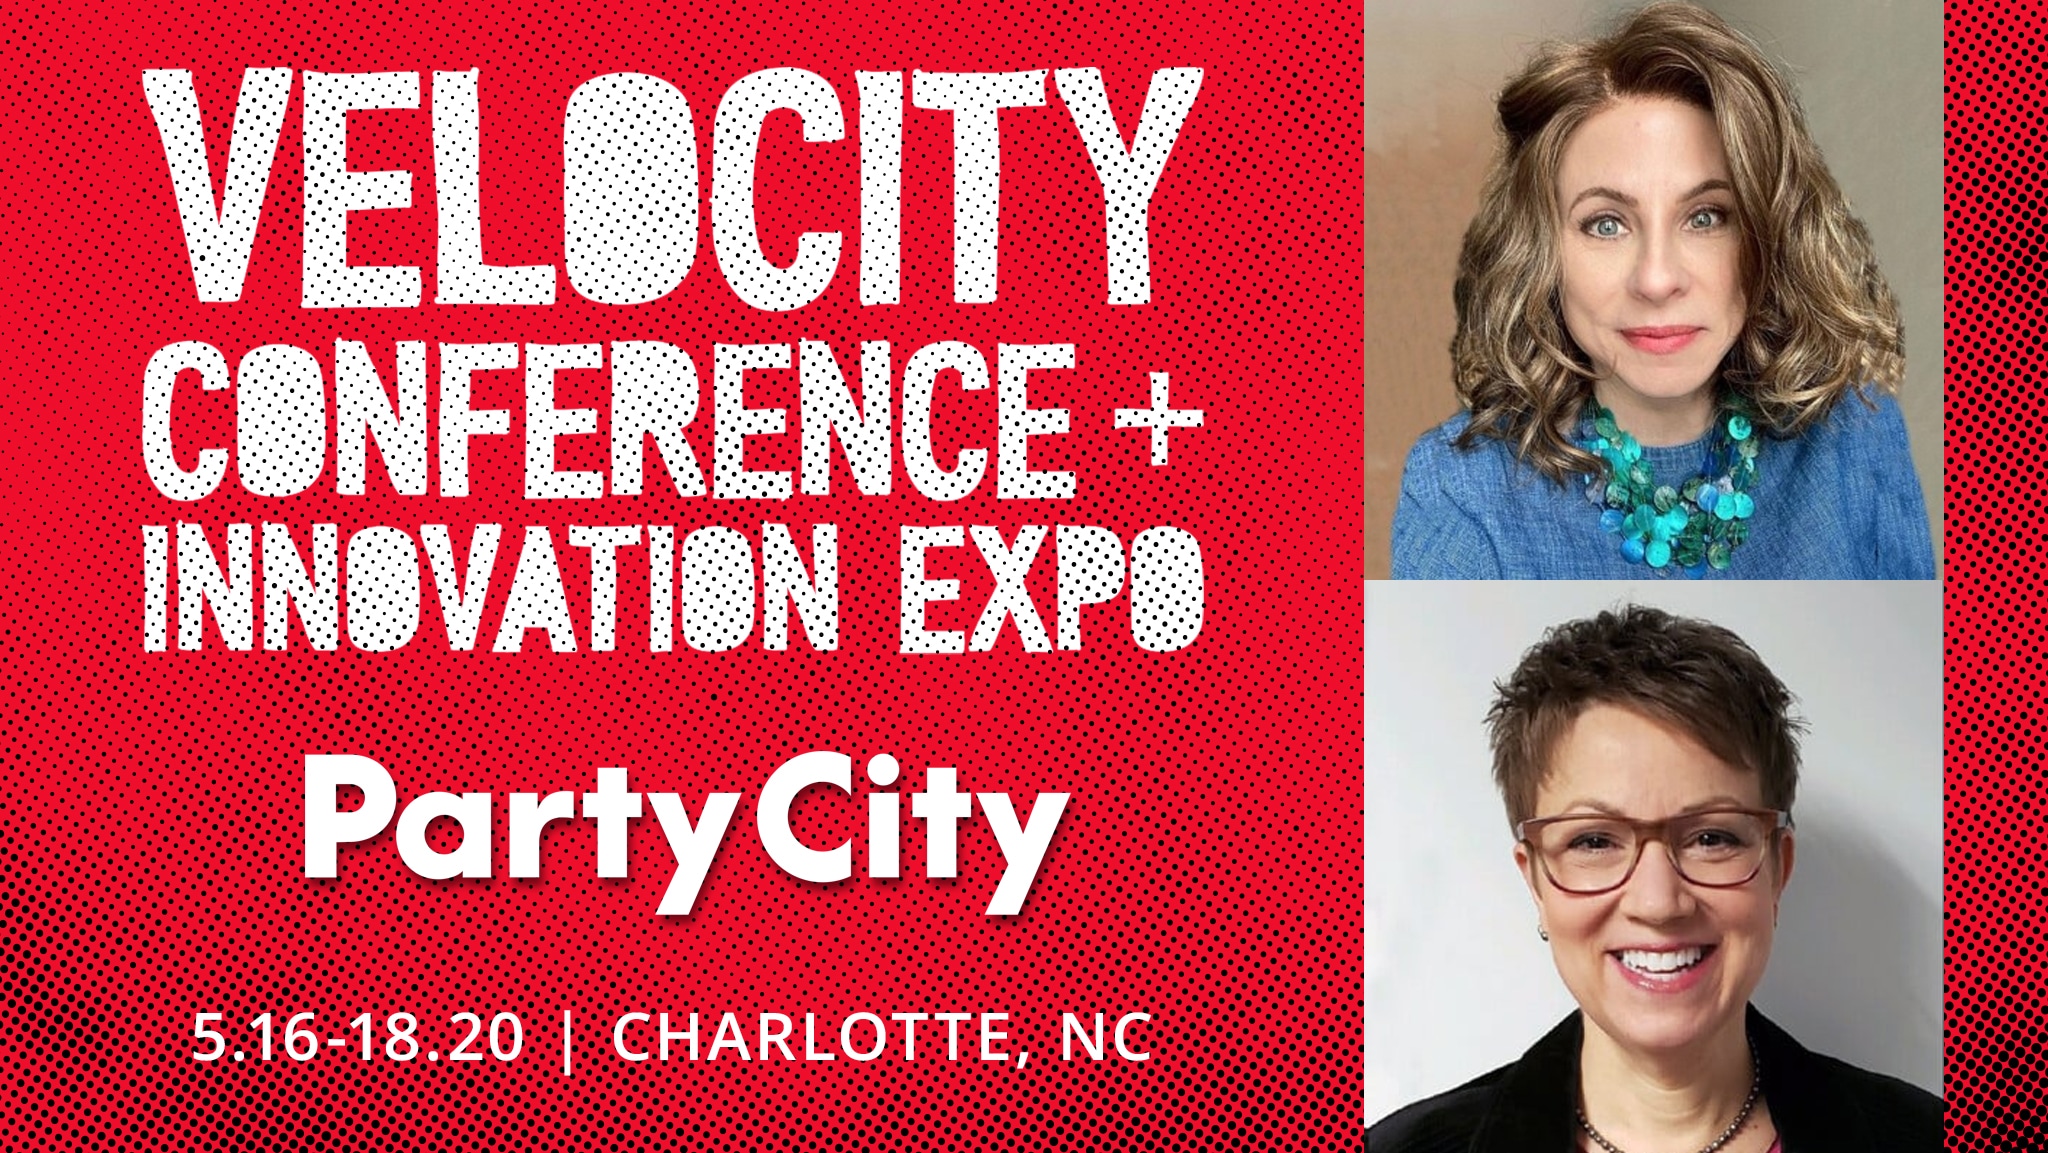 Party City to Present at the Velocity Conference » Velocity Institute